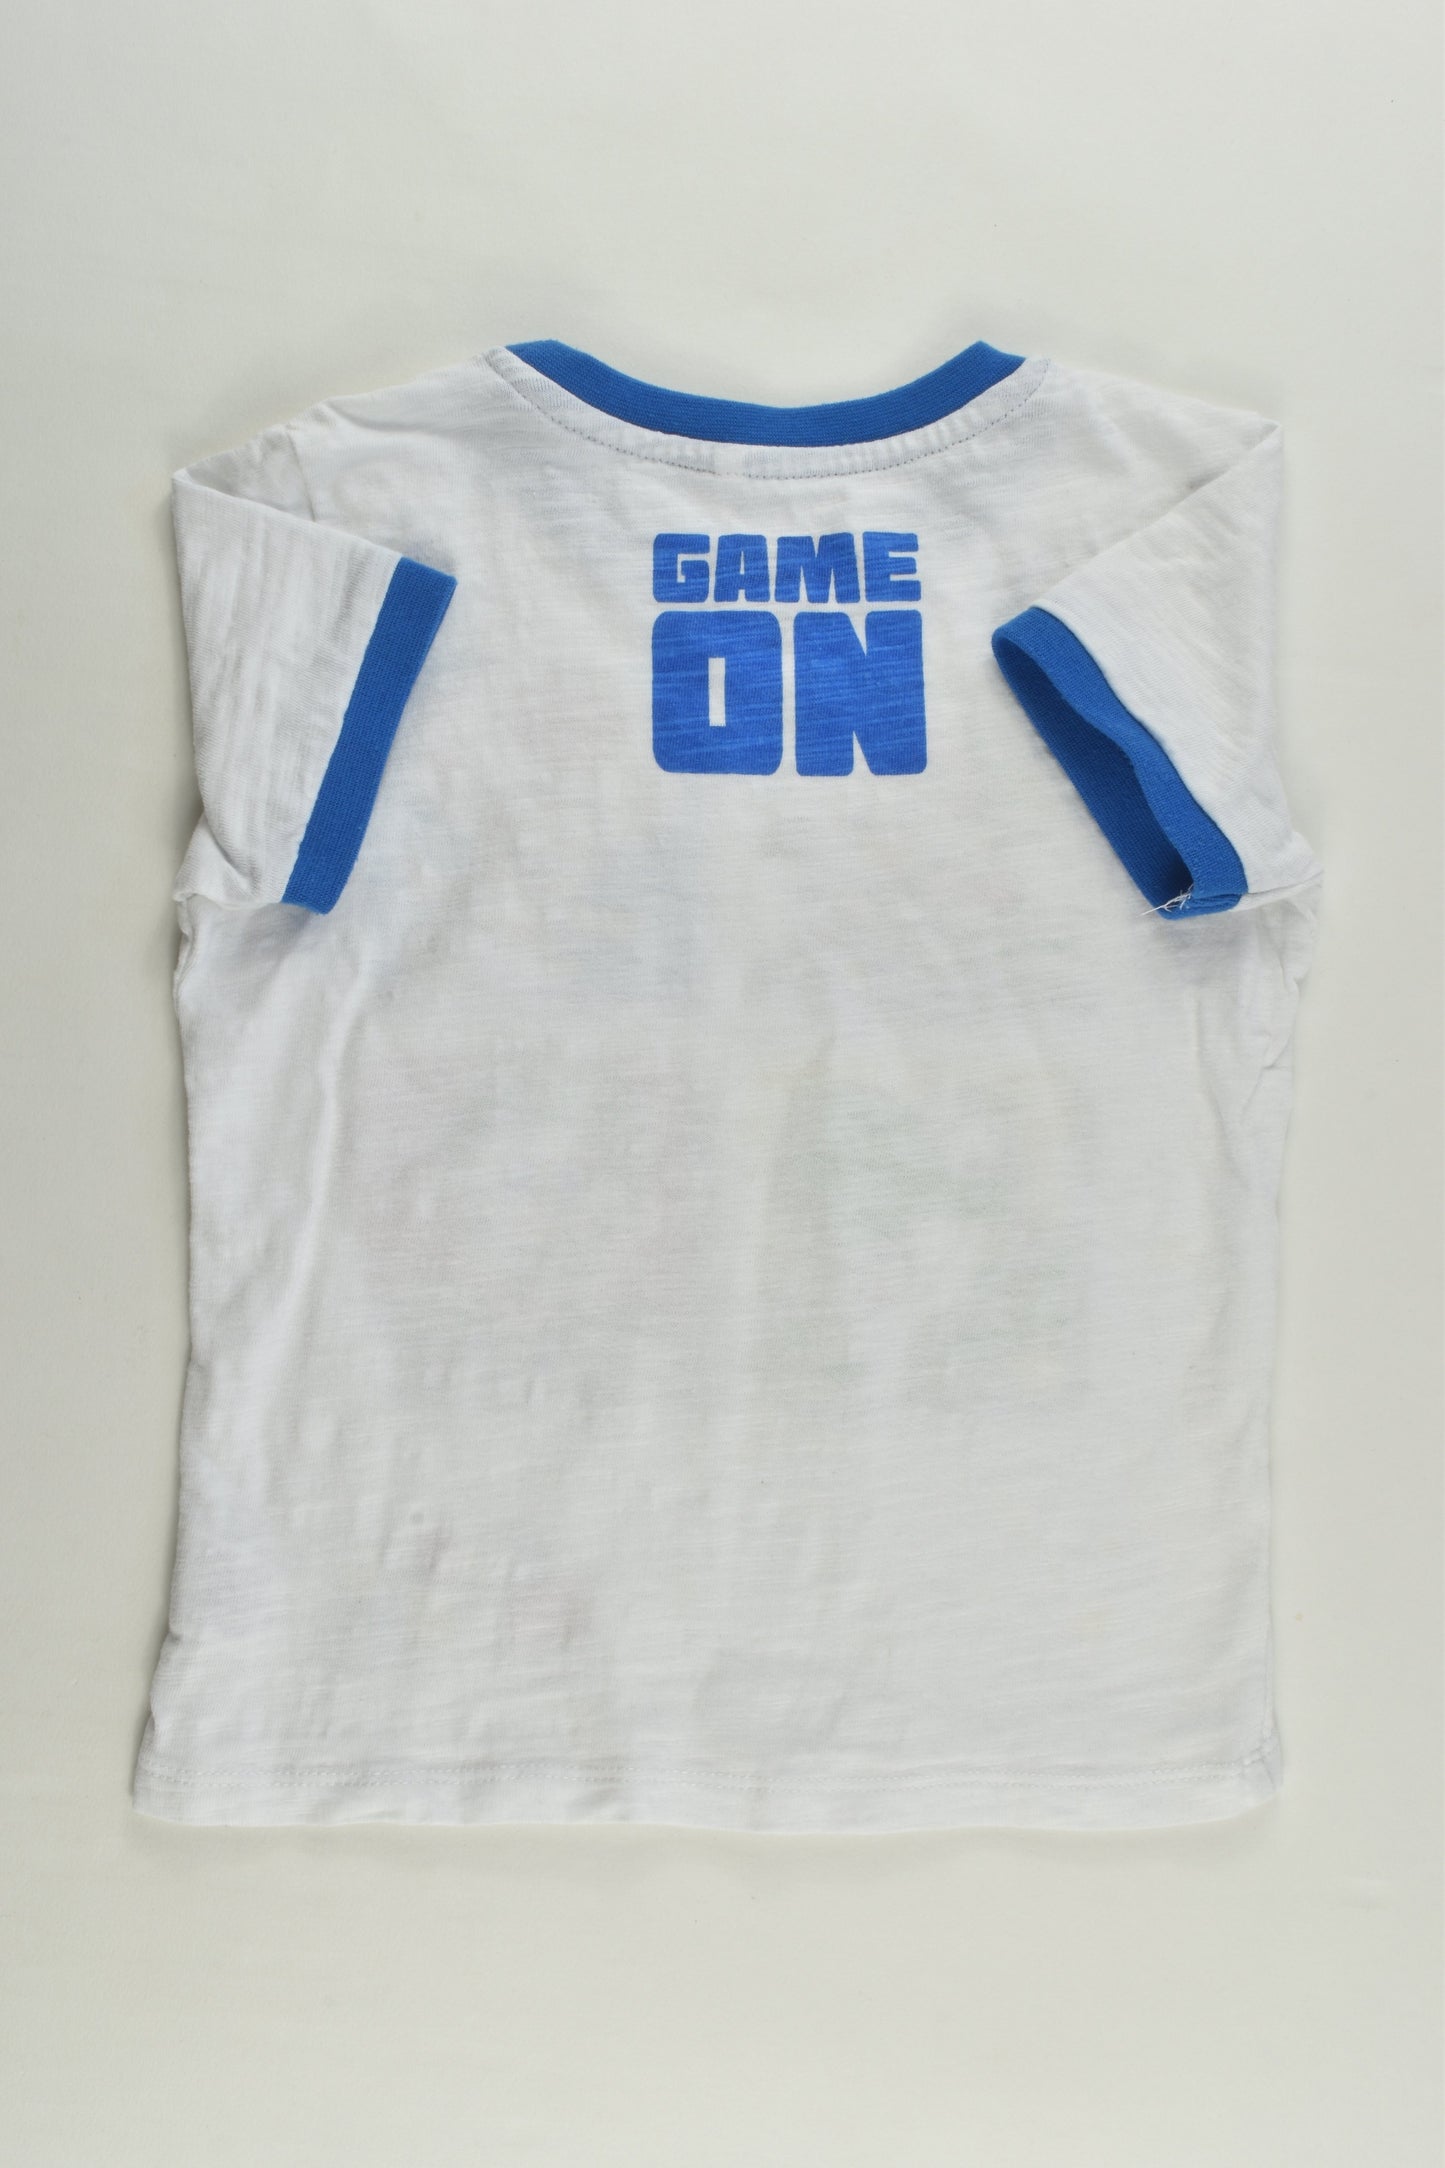 Super Mario Size 3 'Game On' T-shirt